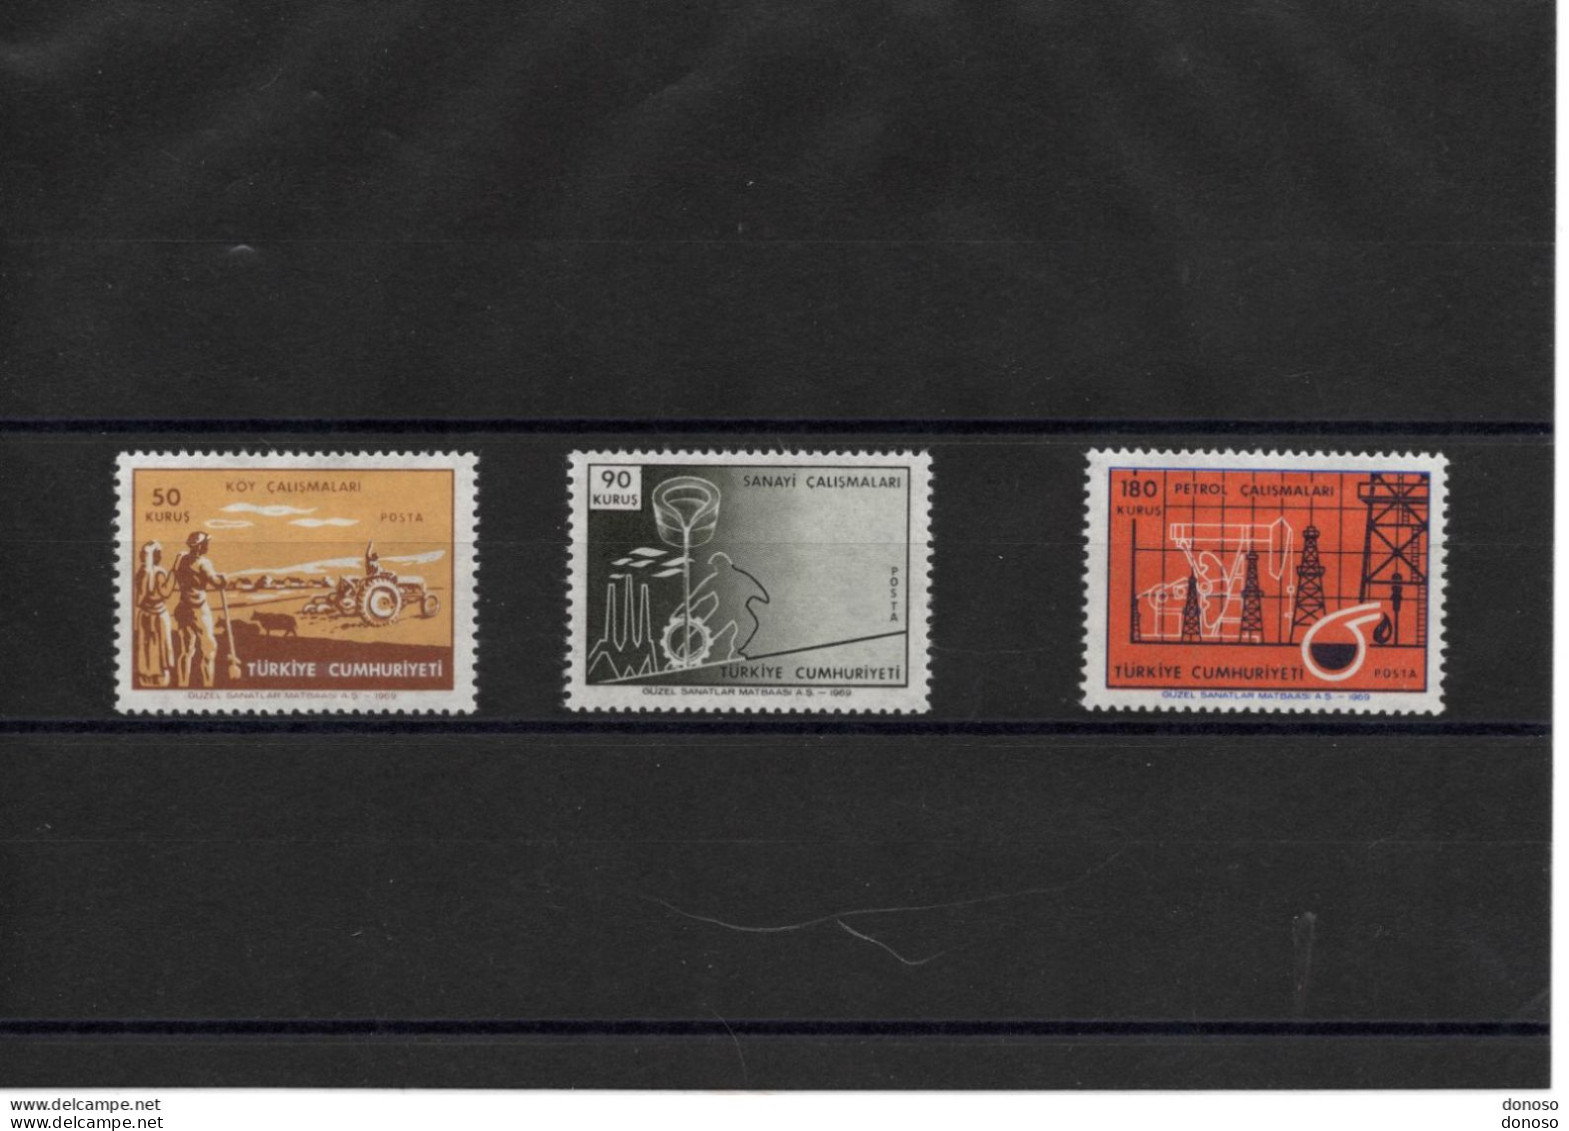 TURQUIE 1969 Motoculture, Industrie, Pétrole Yvert 1907-1908 + 1910 NEUF** MNH Cote : 6,25 Euros - Unused Stamps